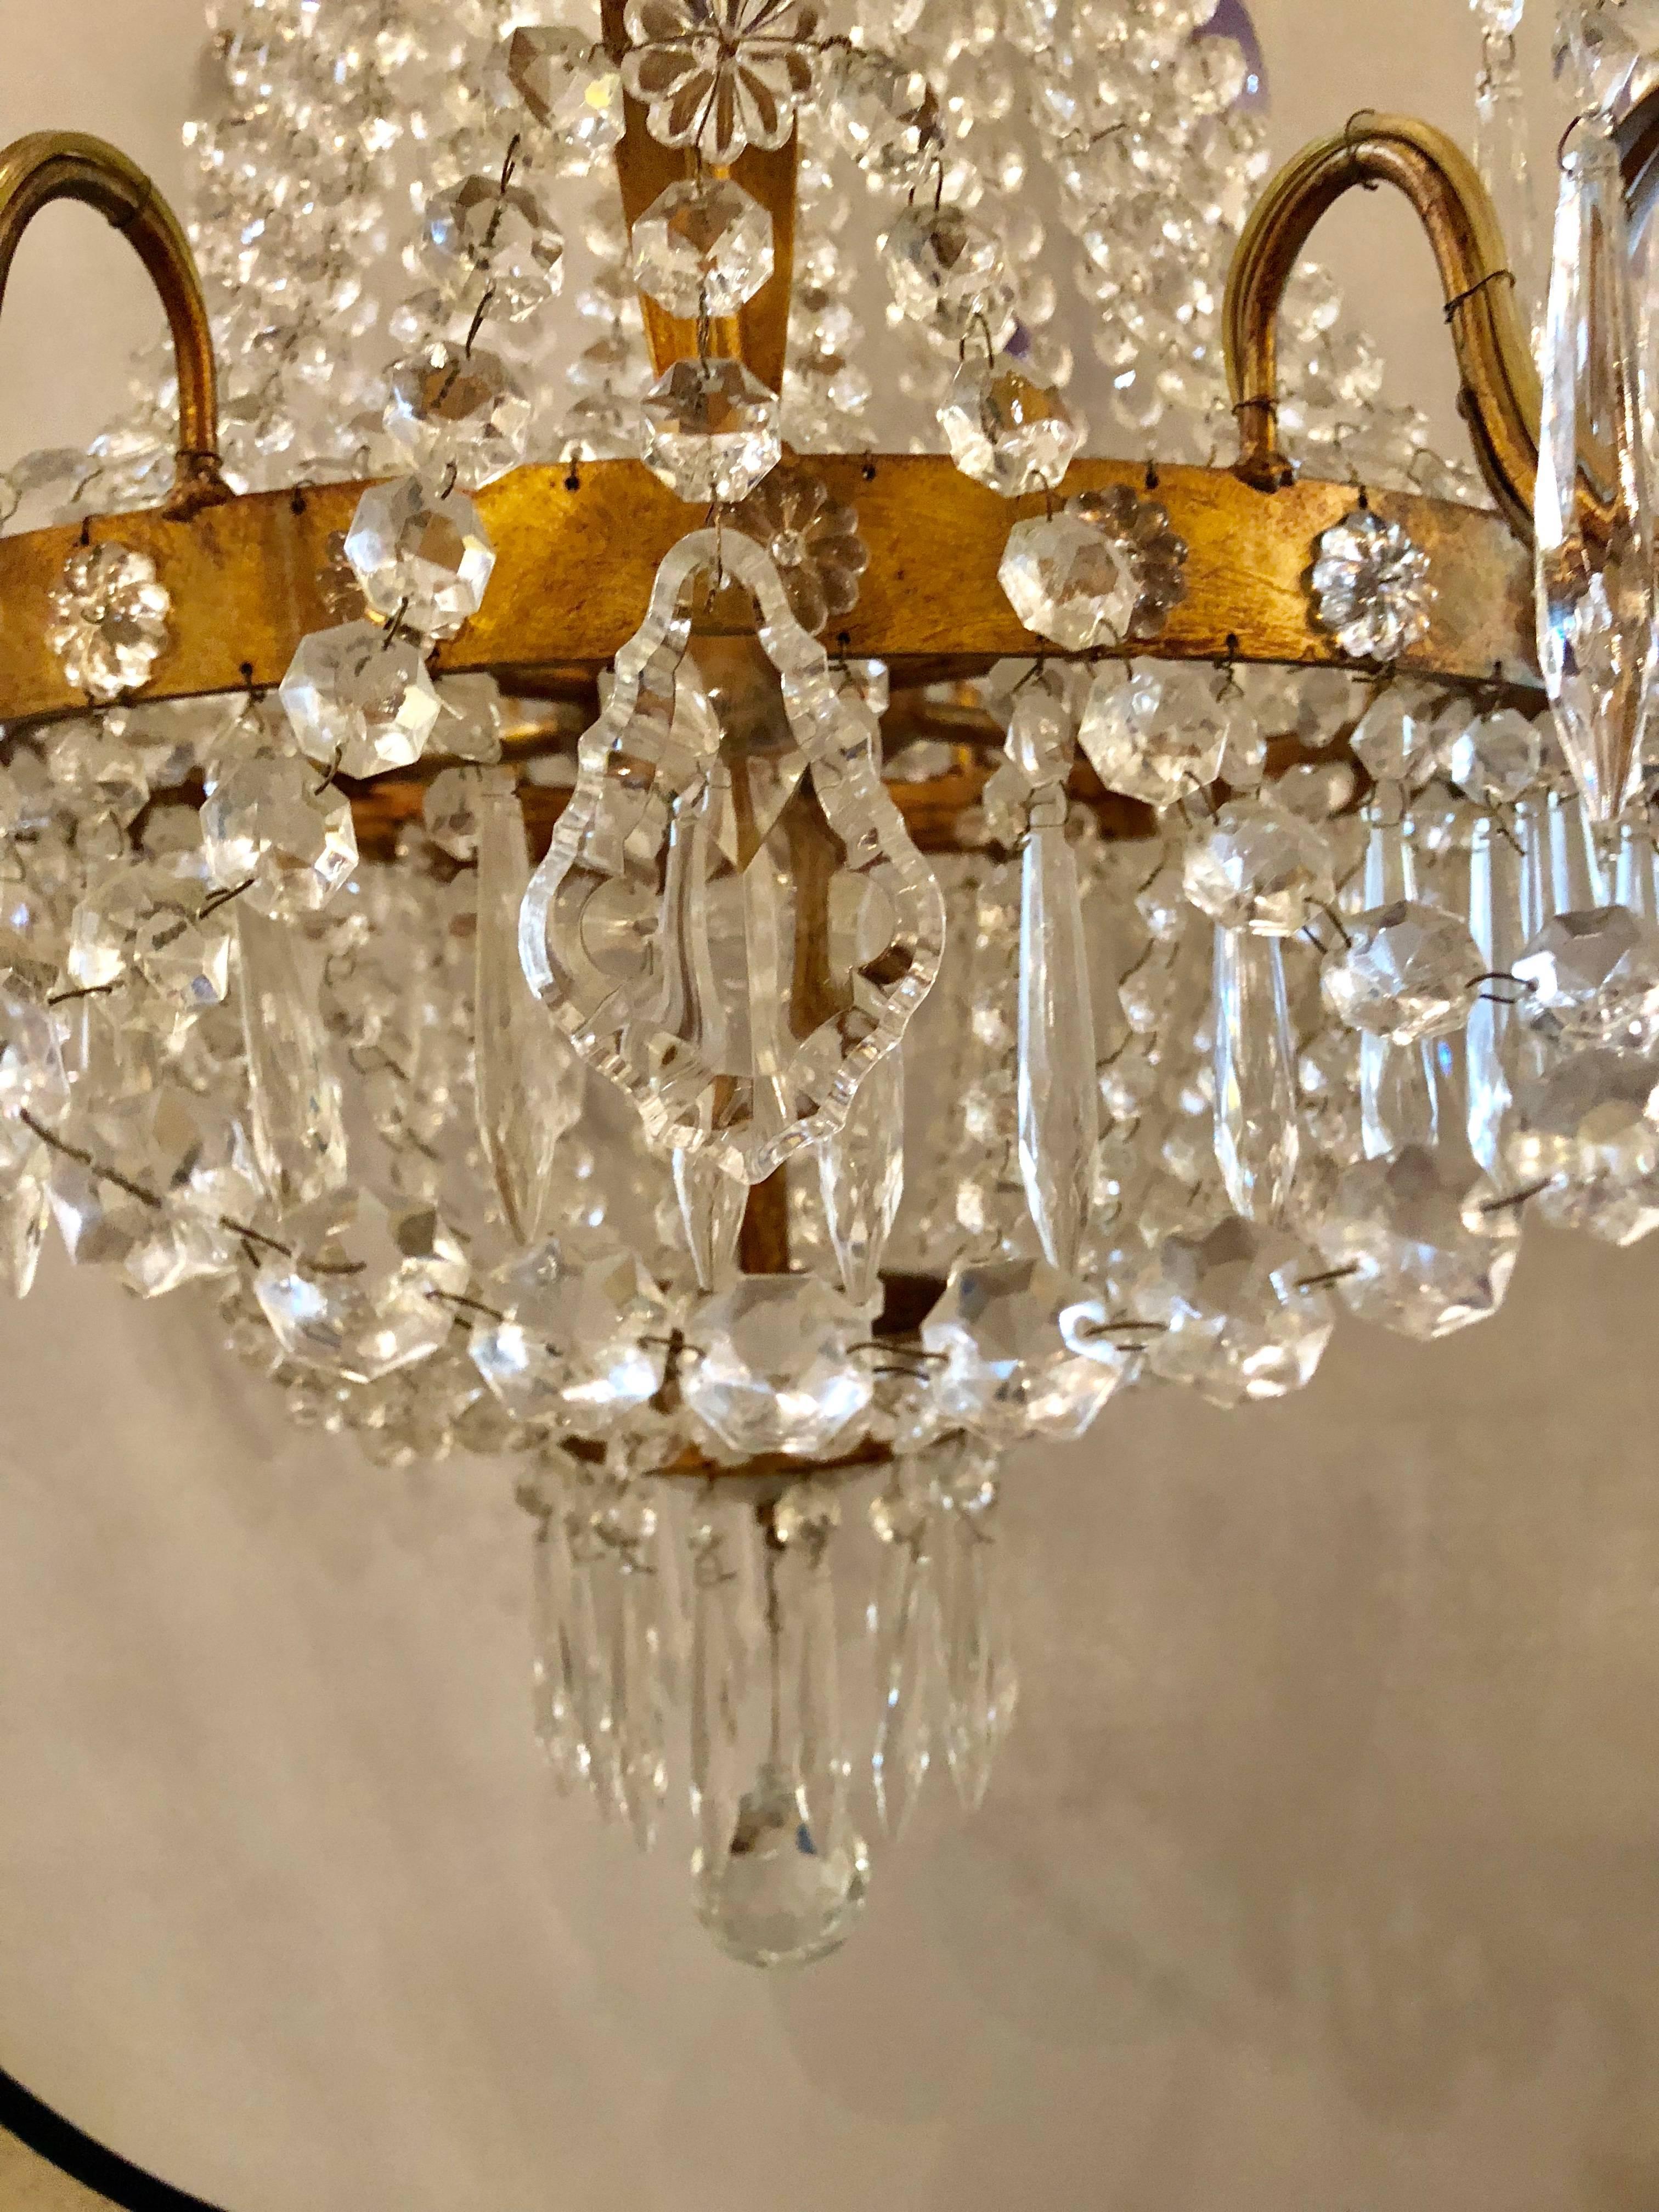 A Niermann Weeks Original Campaign Chandelier. This finely cast metal and crystal chandelier by Weeks (Item # 10-04799-41-12) was purchased by the present owner in the 1990s and has been give to us as a consignment at less than 50 percent off of the